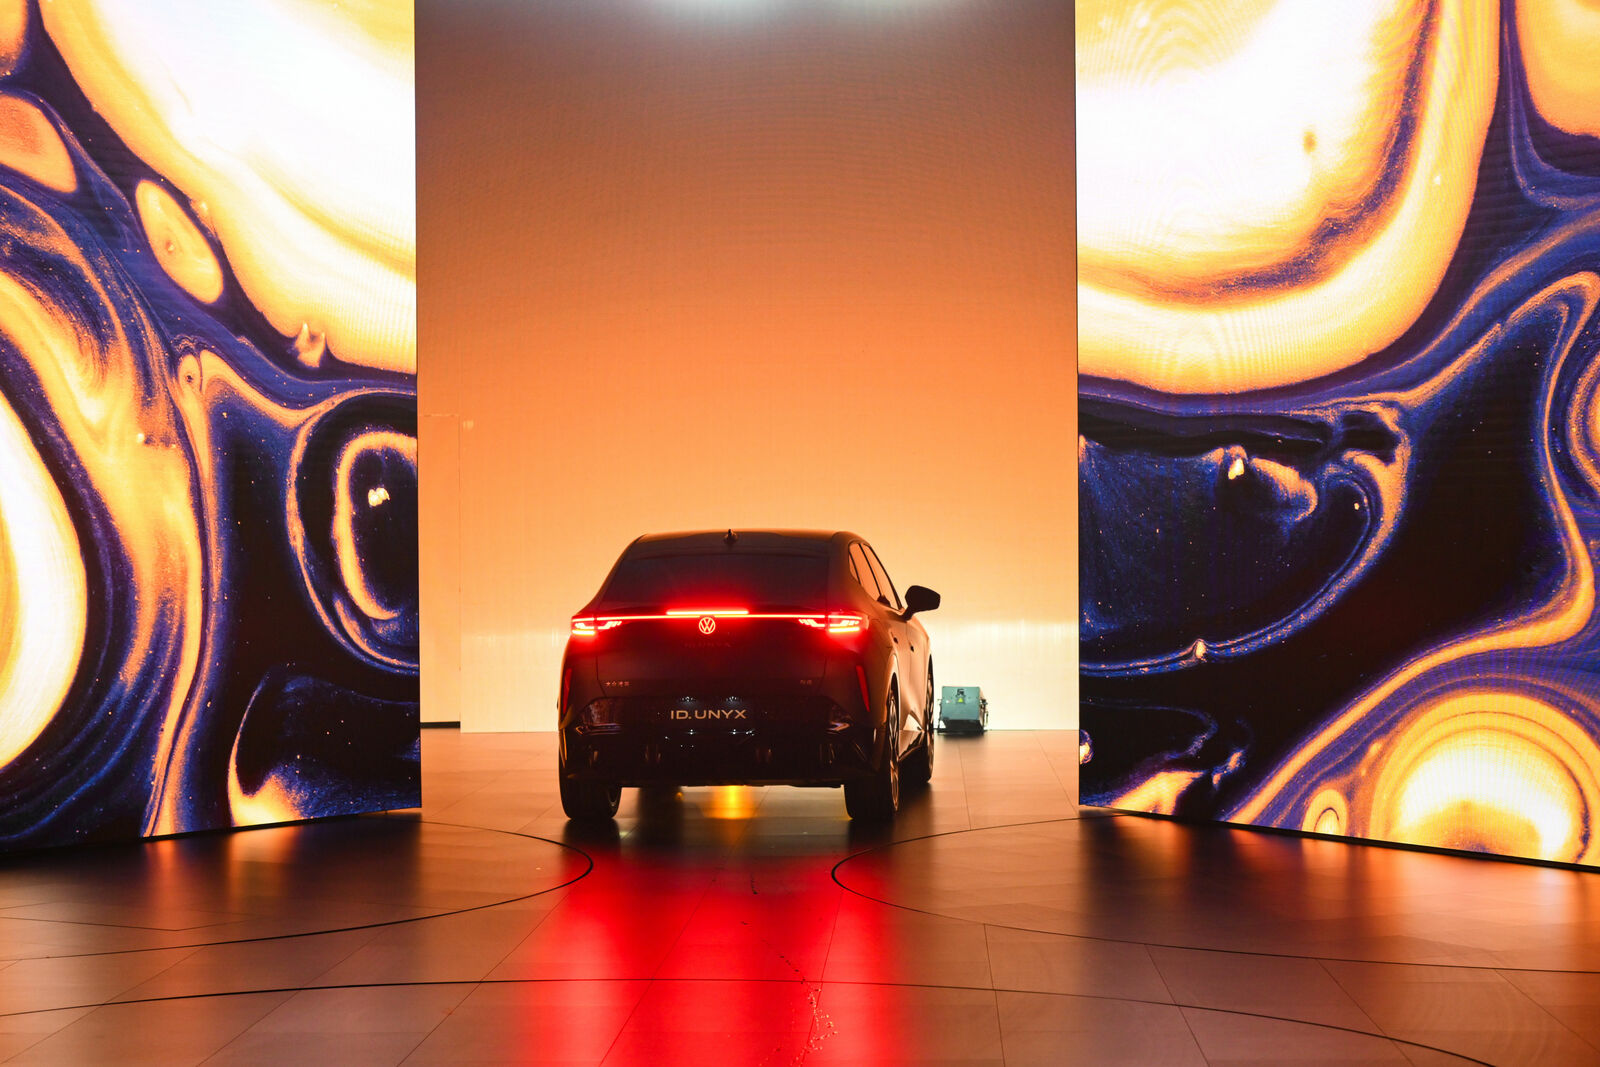 An image of a modern car displayed in a showroom against a backdrop of glowing, abstract artworks. The rear view of the car is illuminated, highlighting the red tail light prominently.